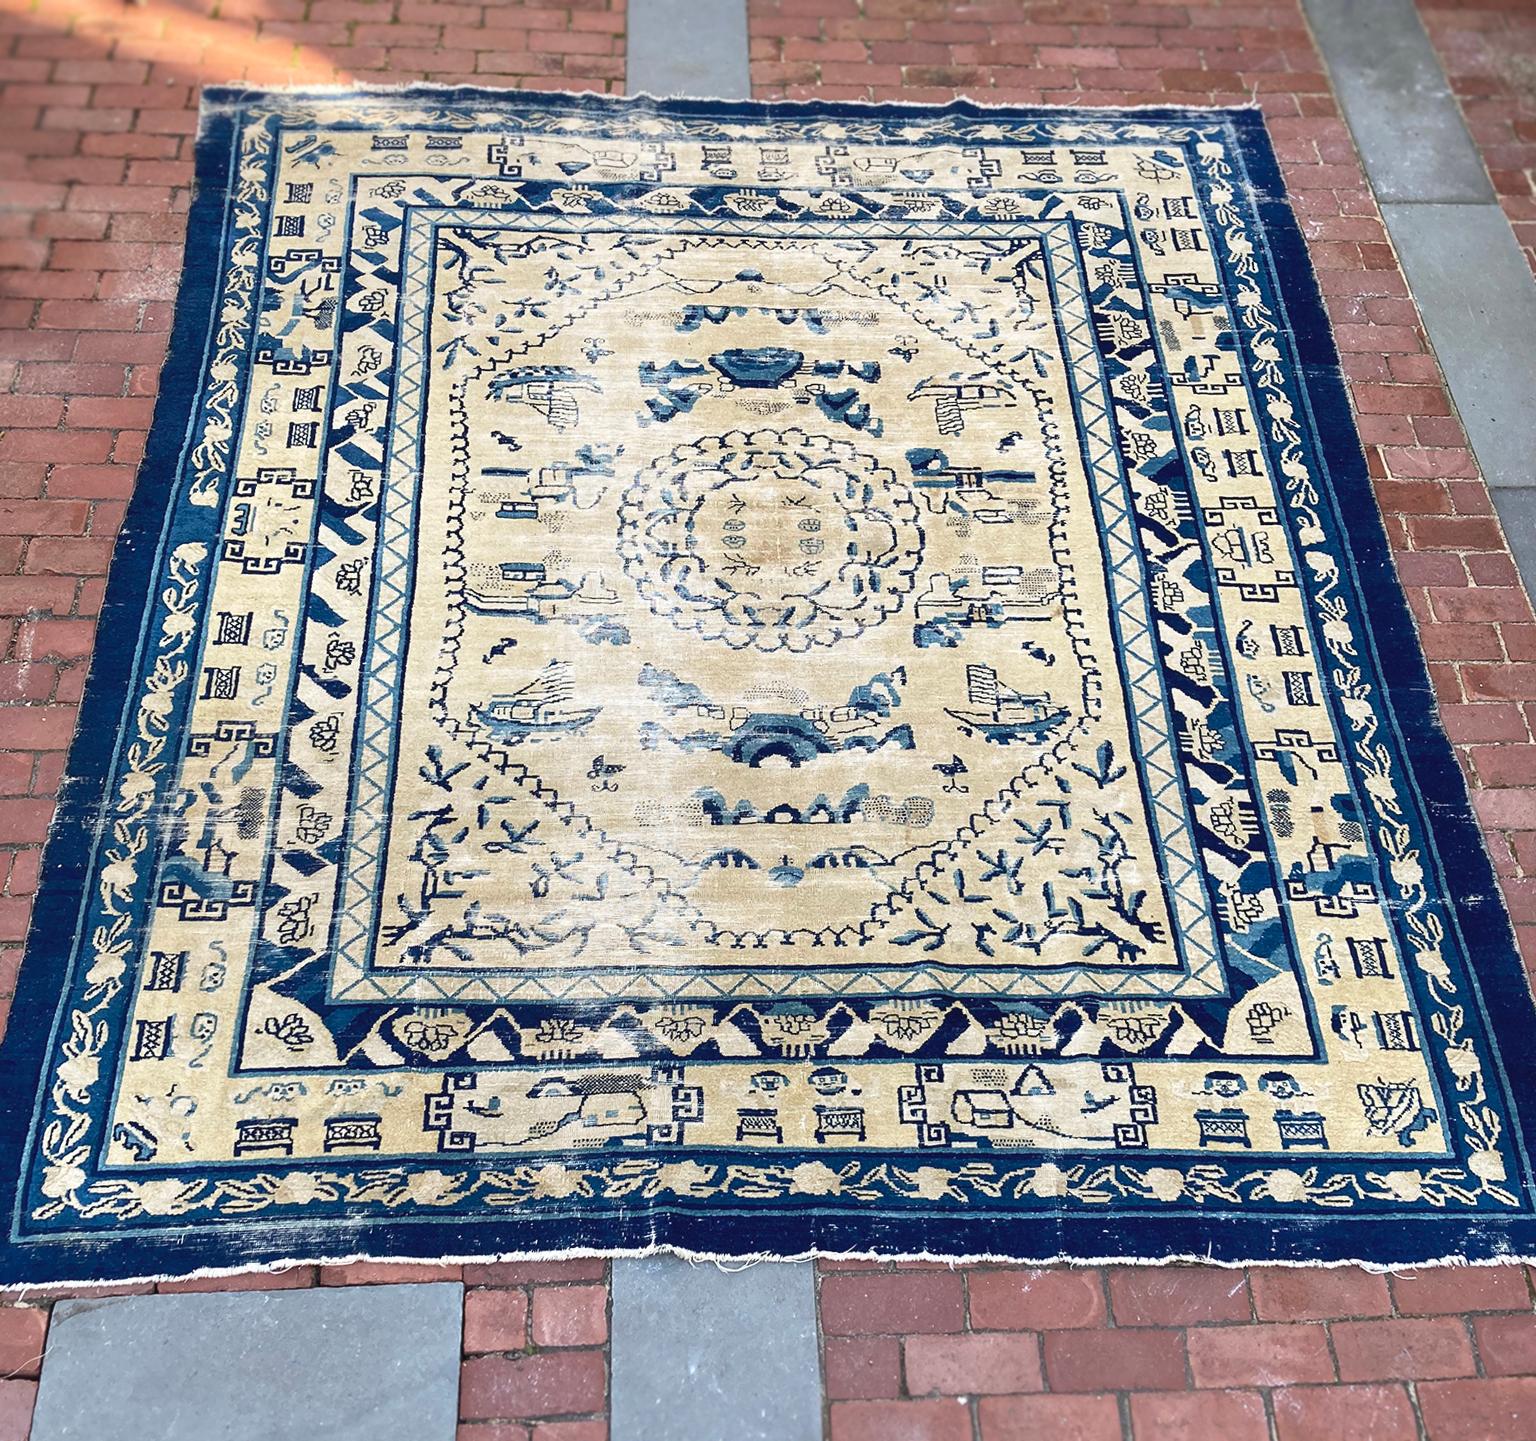 Beautifully aged Chinese Art Deco rug, woven in the 1920s. A lovely palette of blues and ivory white. The composition centers a stylized, map-like design framed by a series of borders with geometric, landscape, and floral motifs. 

Dimensions:
8'